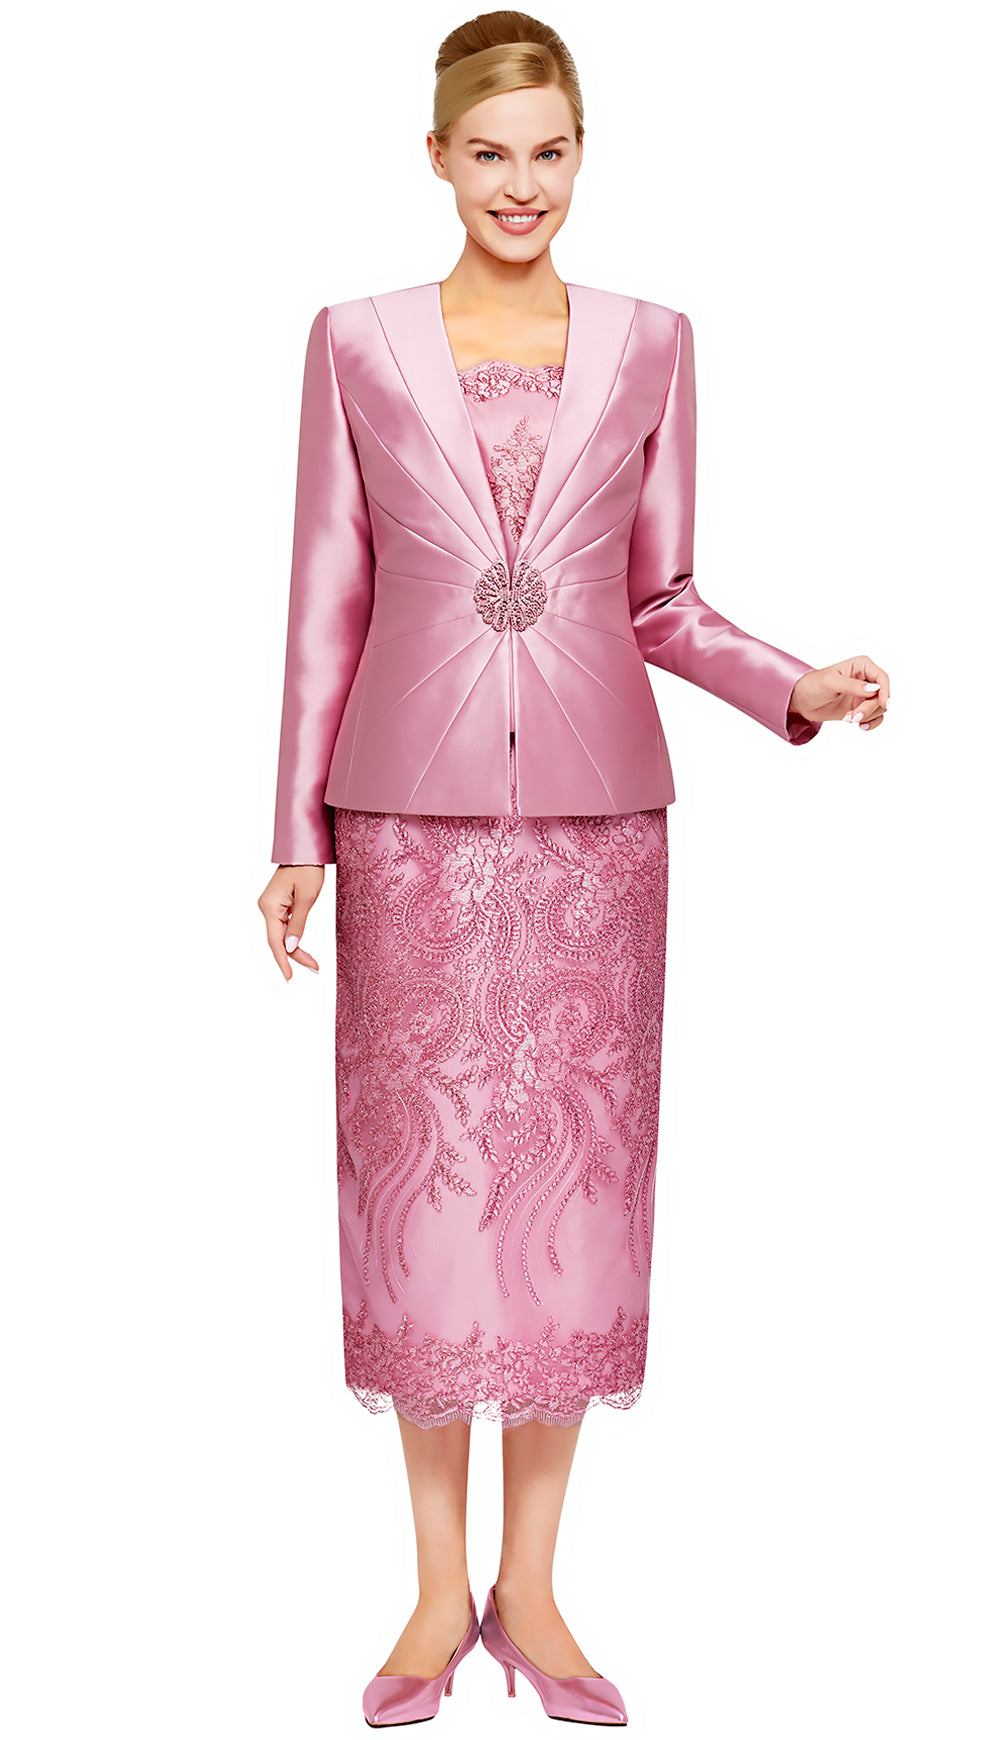 Nina Massini Church Suit 2470-Pink - Church Suits For Less